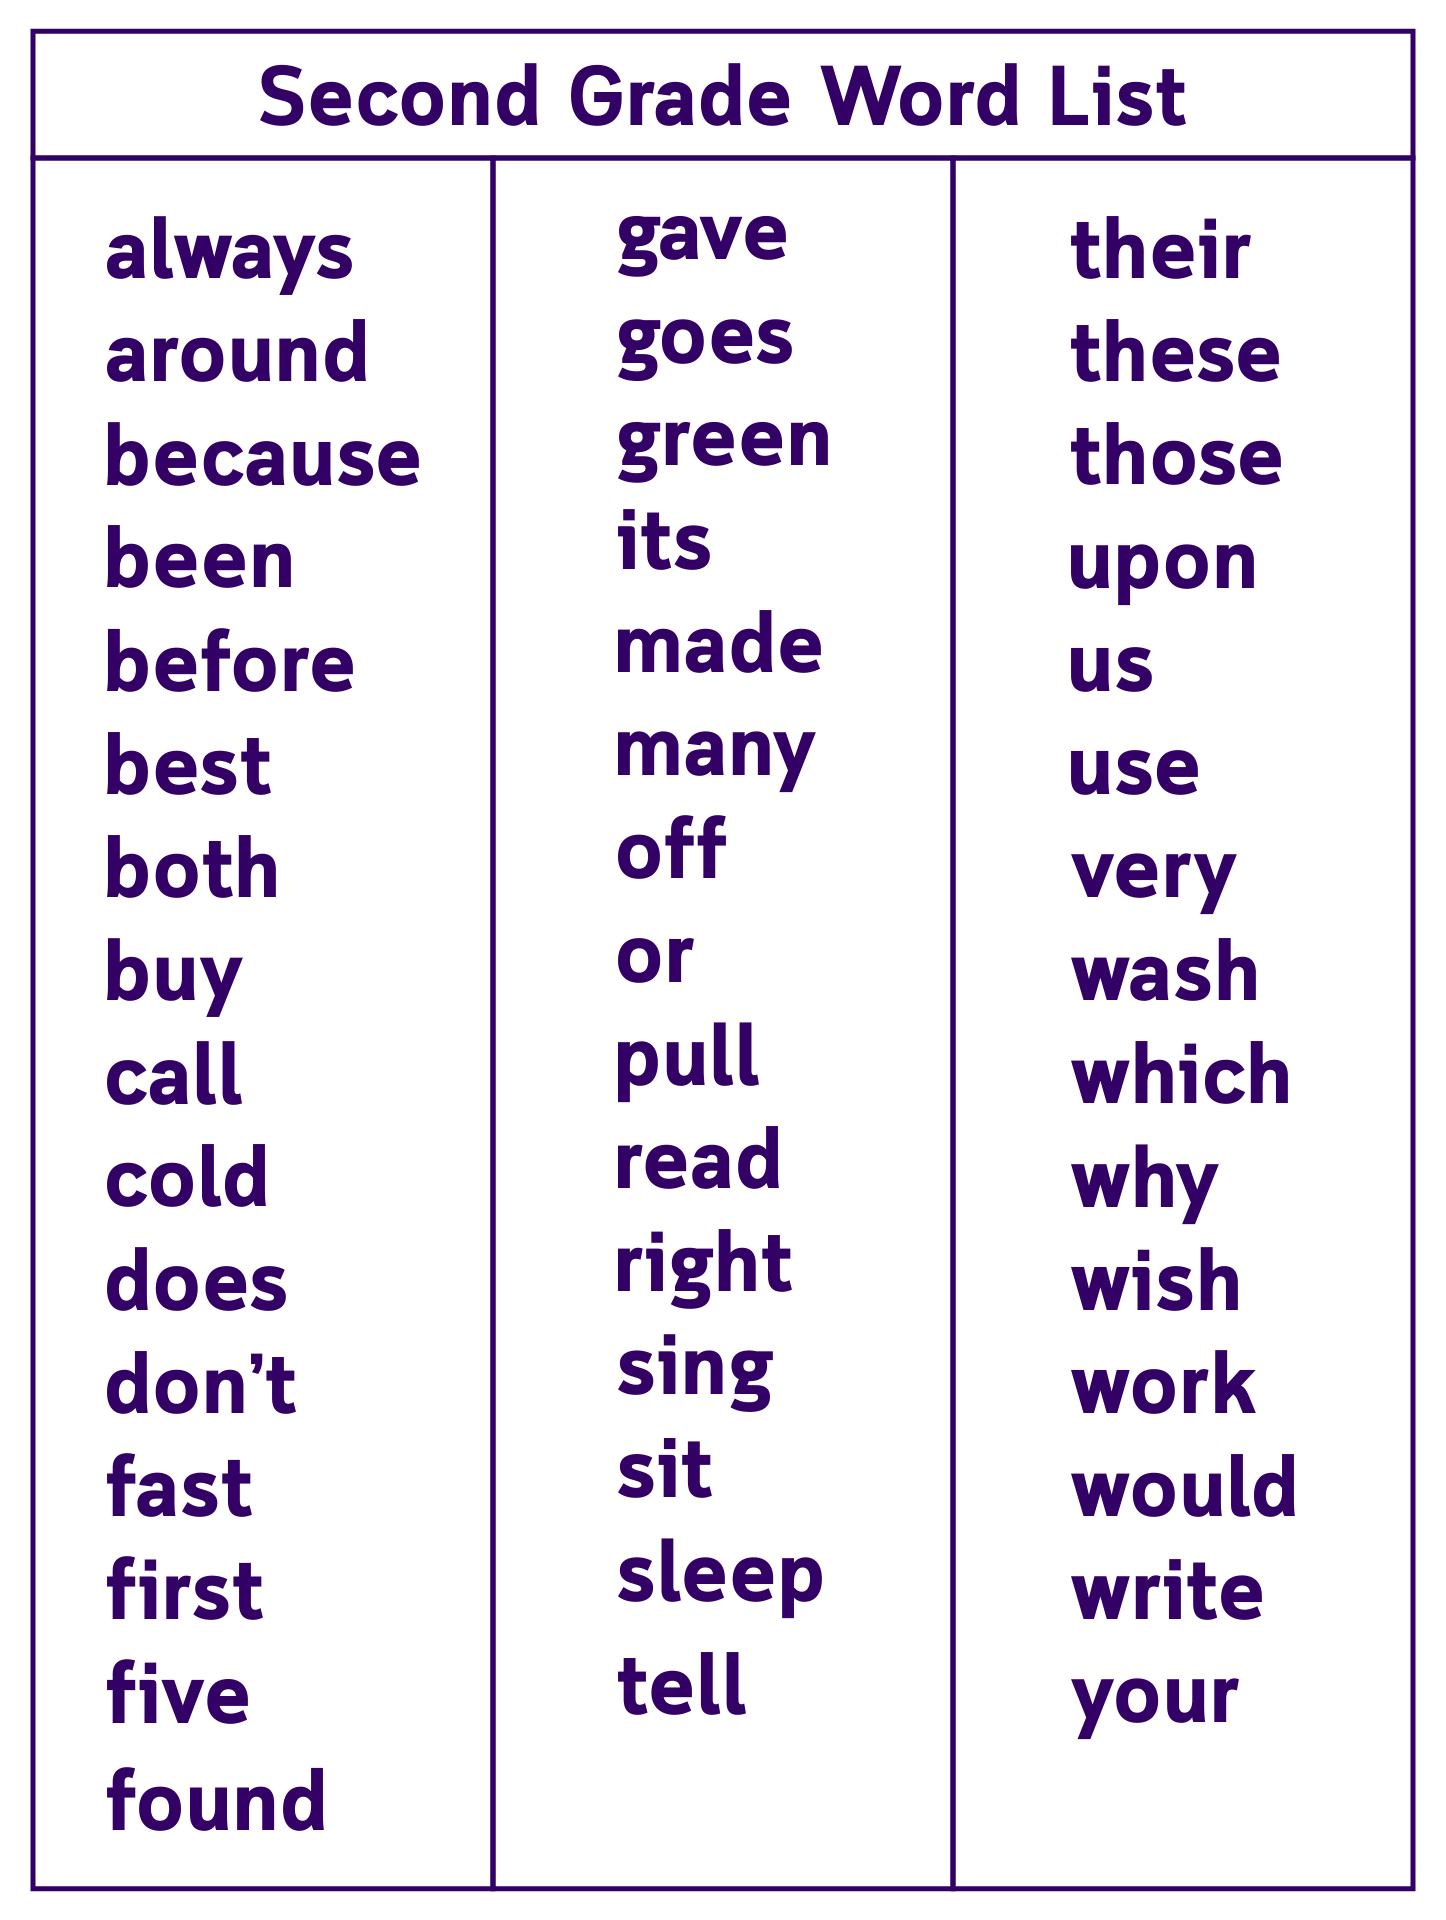 22 Best Second Grade Sight Words Printable - printablee.com Intended For 2nd Grade Sight Words Worksheet